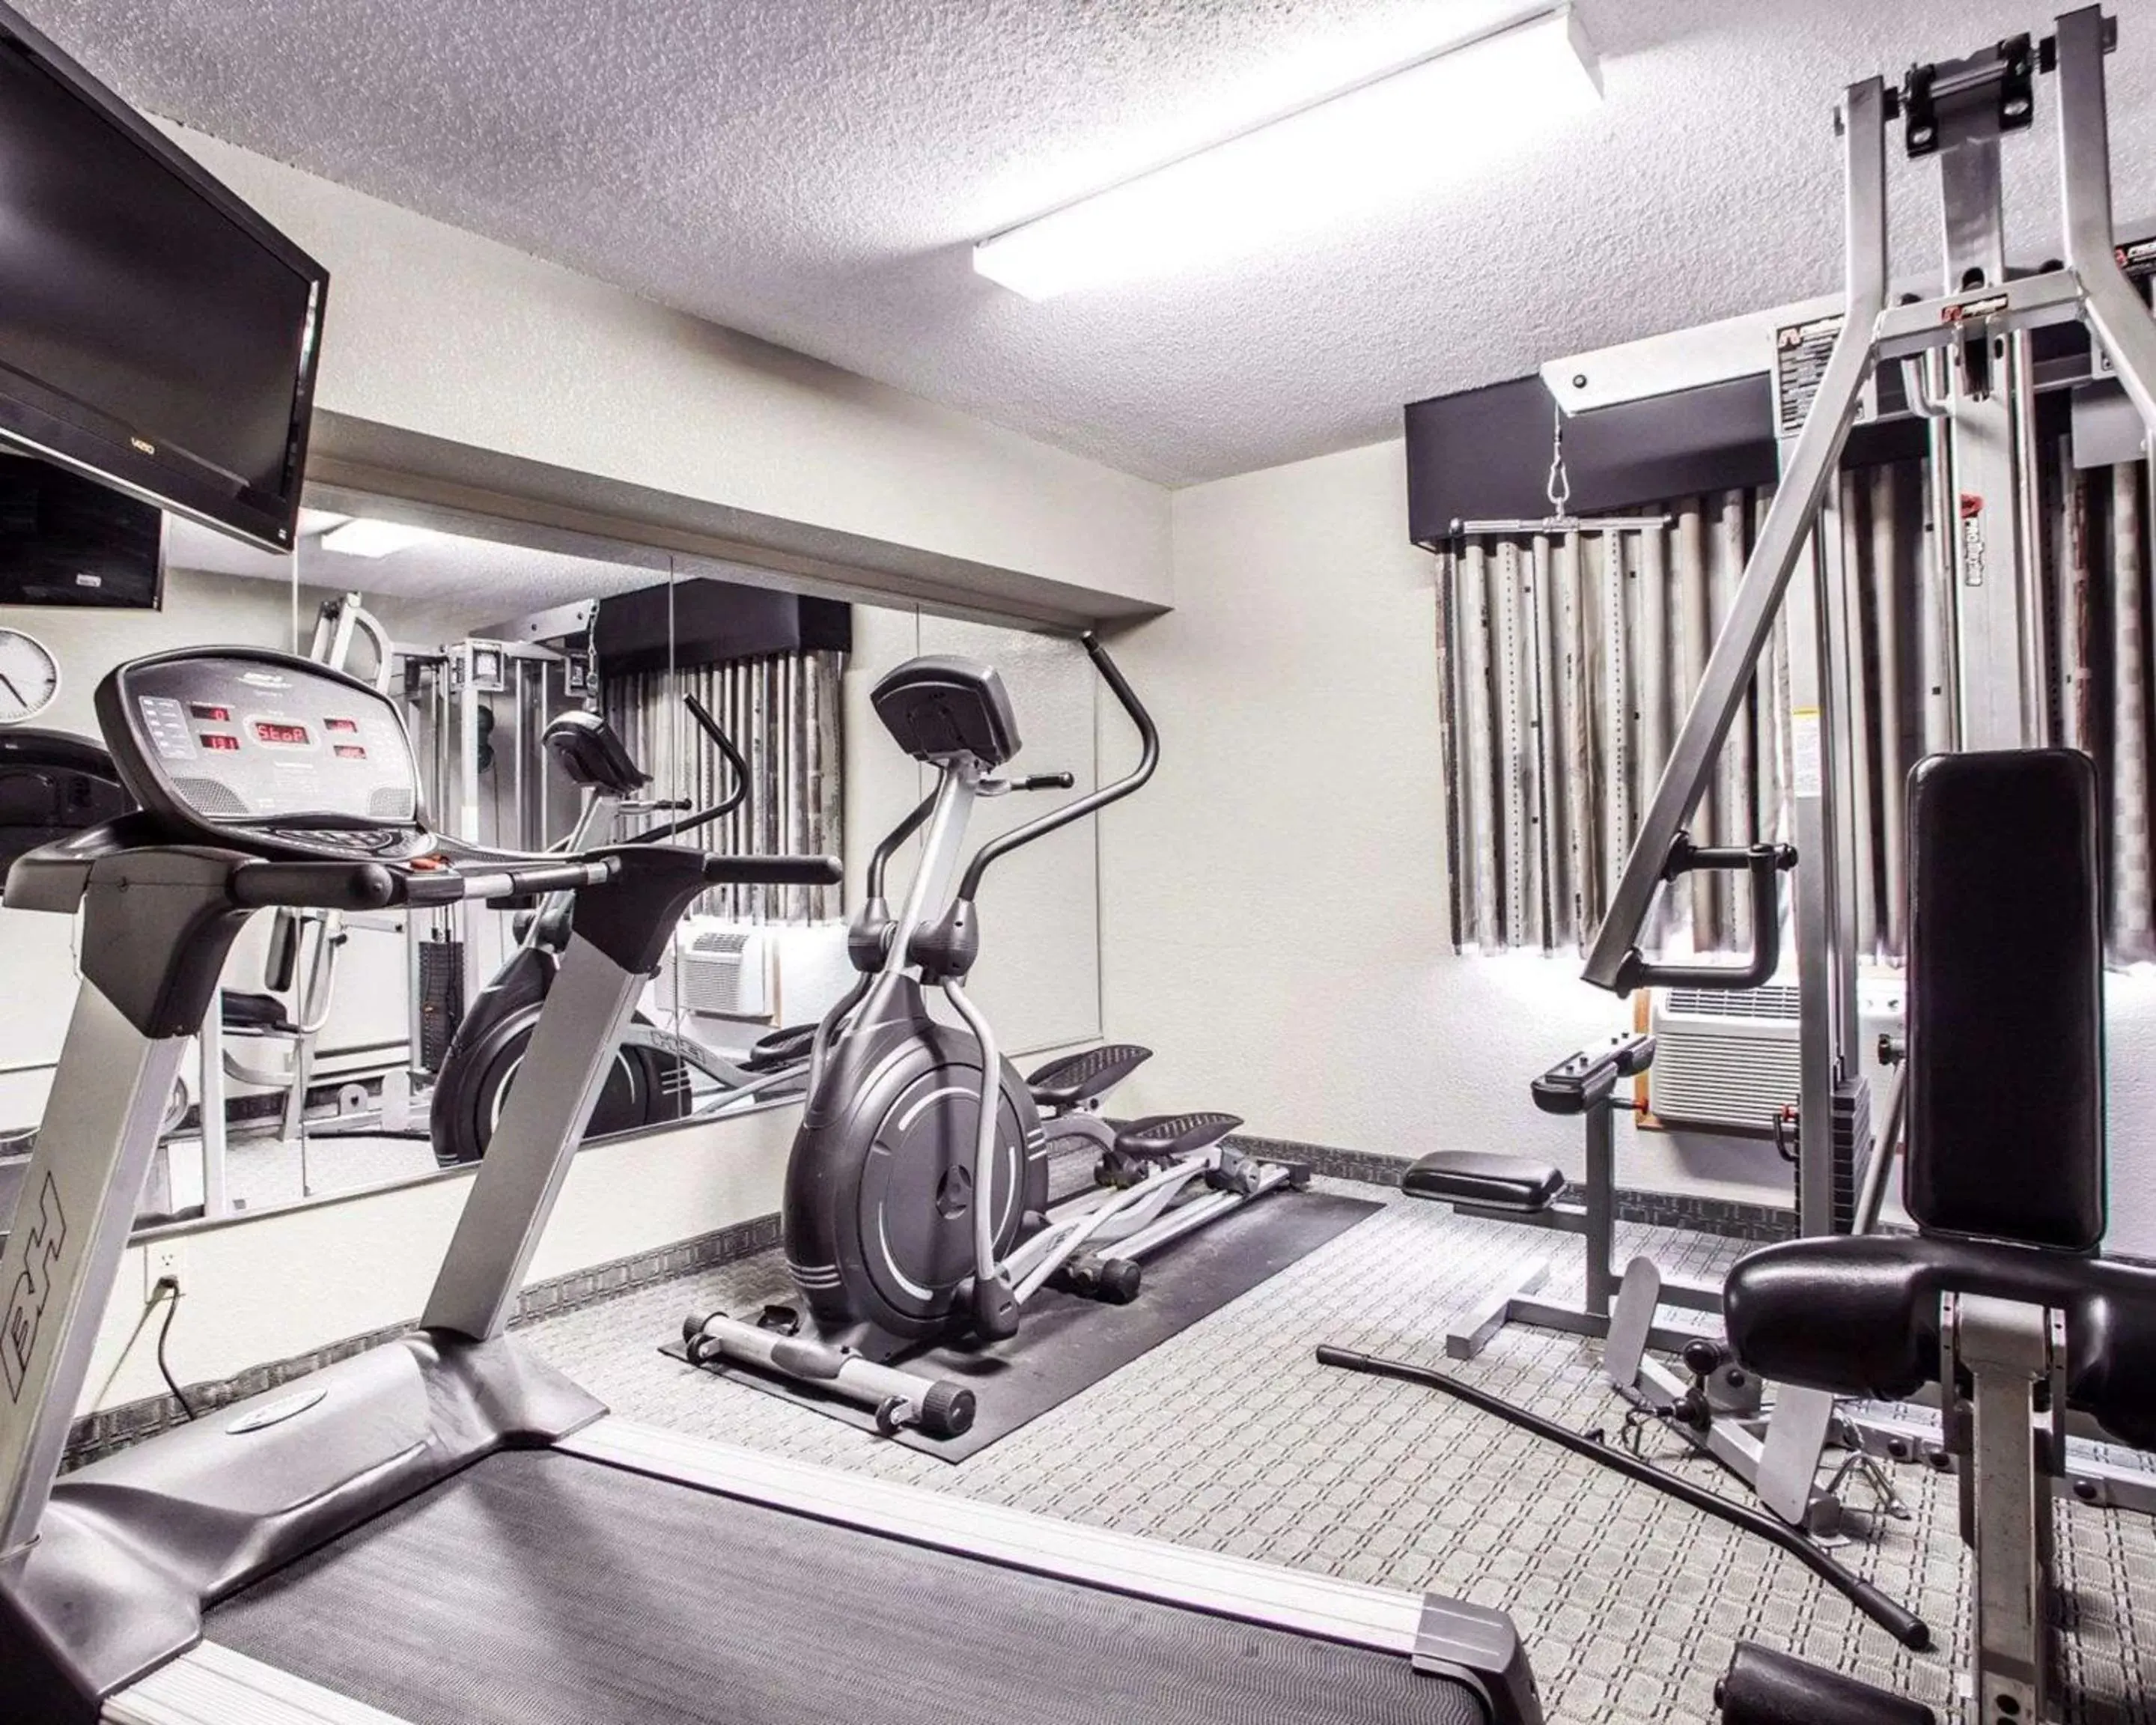 Fitness centre/facilities, Fitness Center/Facilities in Quality Inn & Suites Ankeny-Des Moines